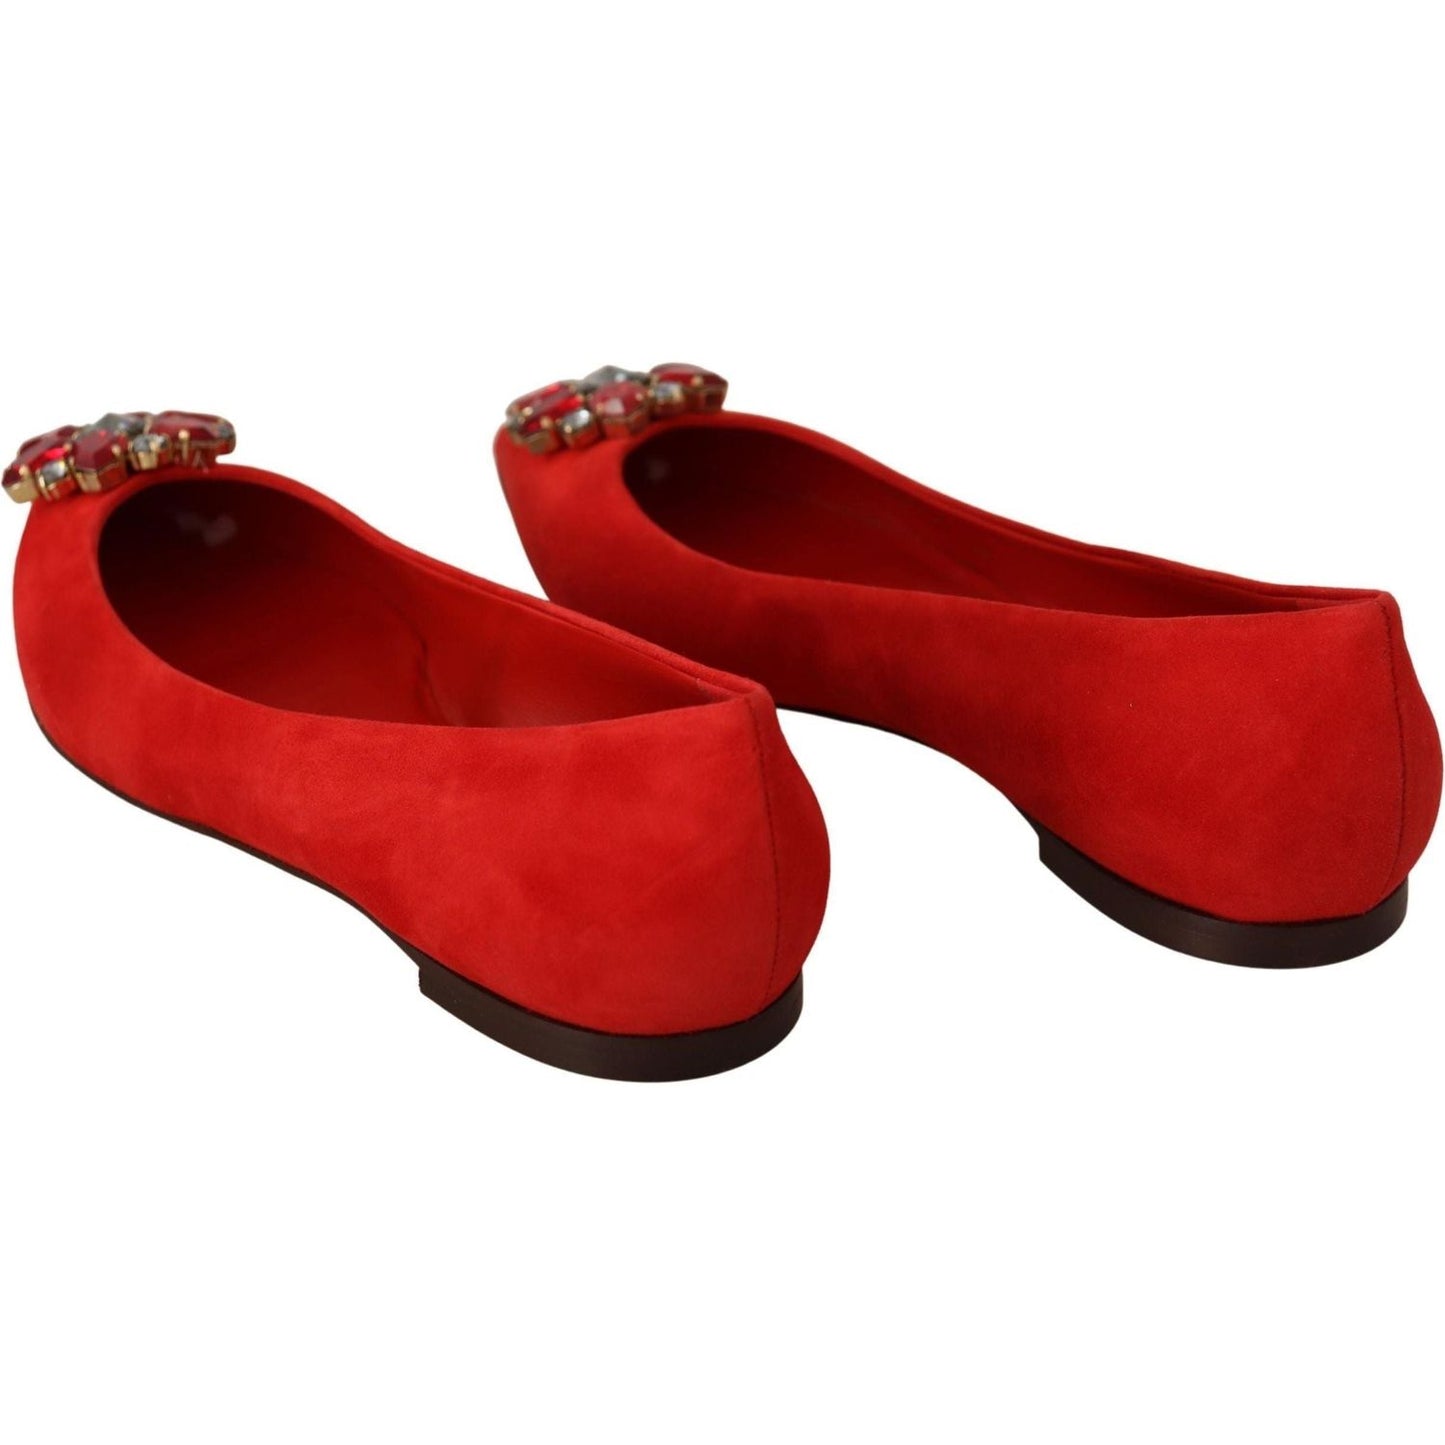 Dolce & Gabbana Crystal Embellished Red Suede Flats red-suede-crystals-loafers-flats-shoes-1